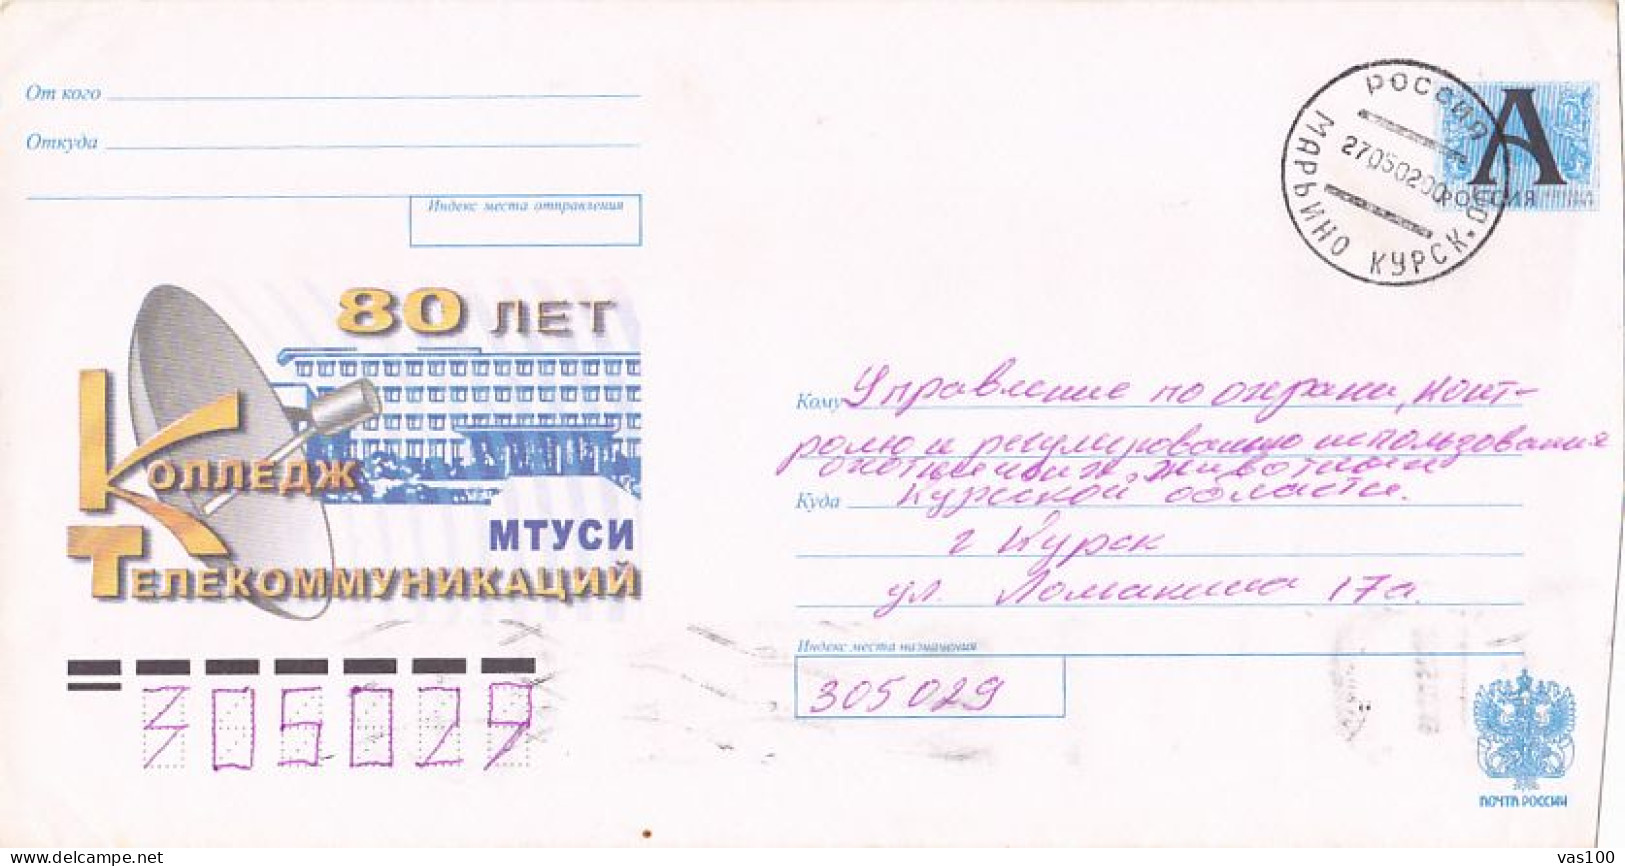 TELECOMMUNICATIONS COLLEGE ANNIVERSARY, COVER STATIONERY, ENTIER POSTAL, 2000, RUSSIA - Entiers Postaux